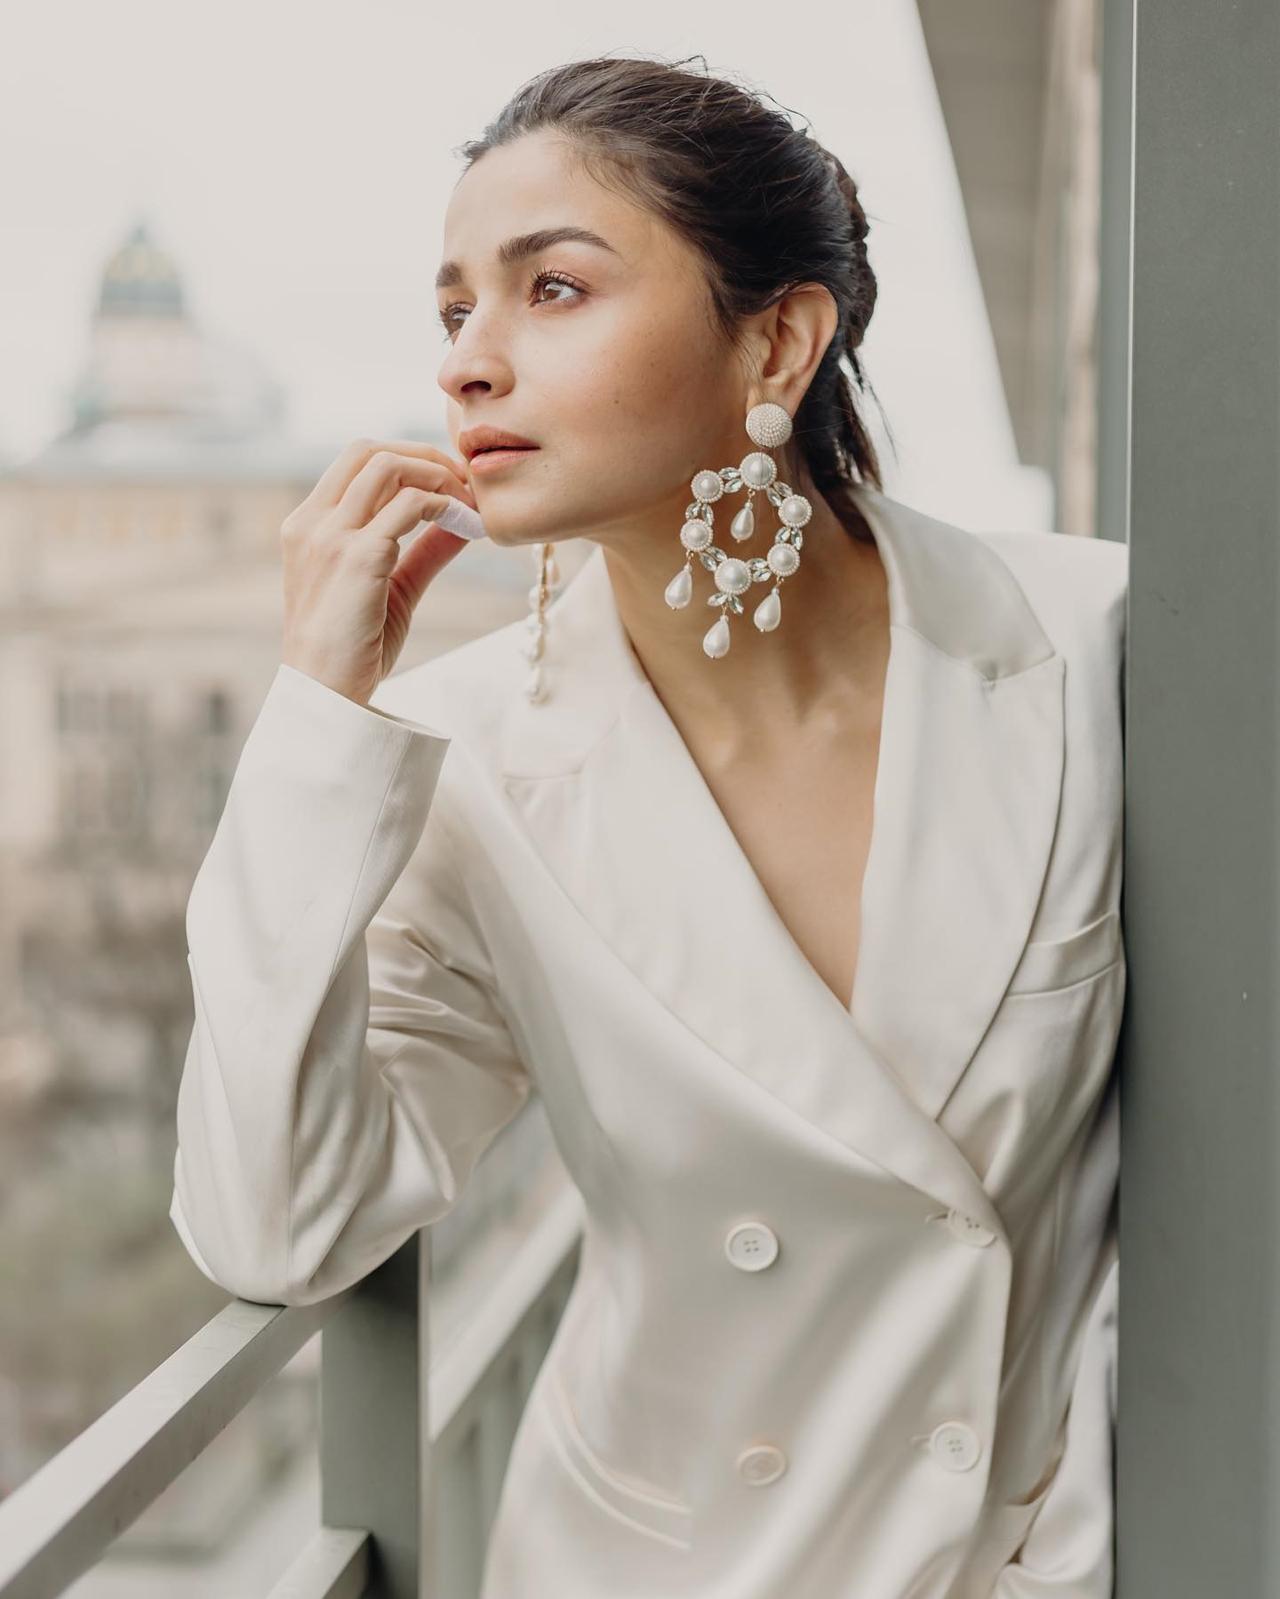 Taking to her Instagram handle on Wednesday, Alia shared pictures in which she looks drop-dead gorgeous, dressed in a white power suit, teamed with a flowy matching lower. She tied her hair back and kept her make-up natural. The highlight of her classy look is the gorgeous pair of ivory-and-gold earrings